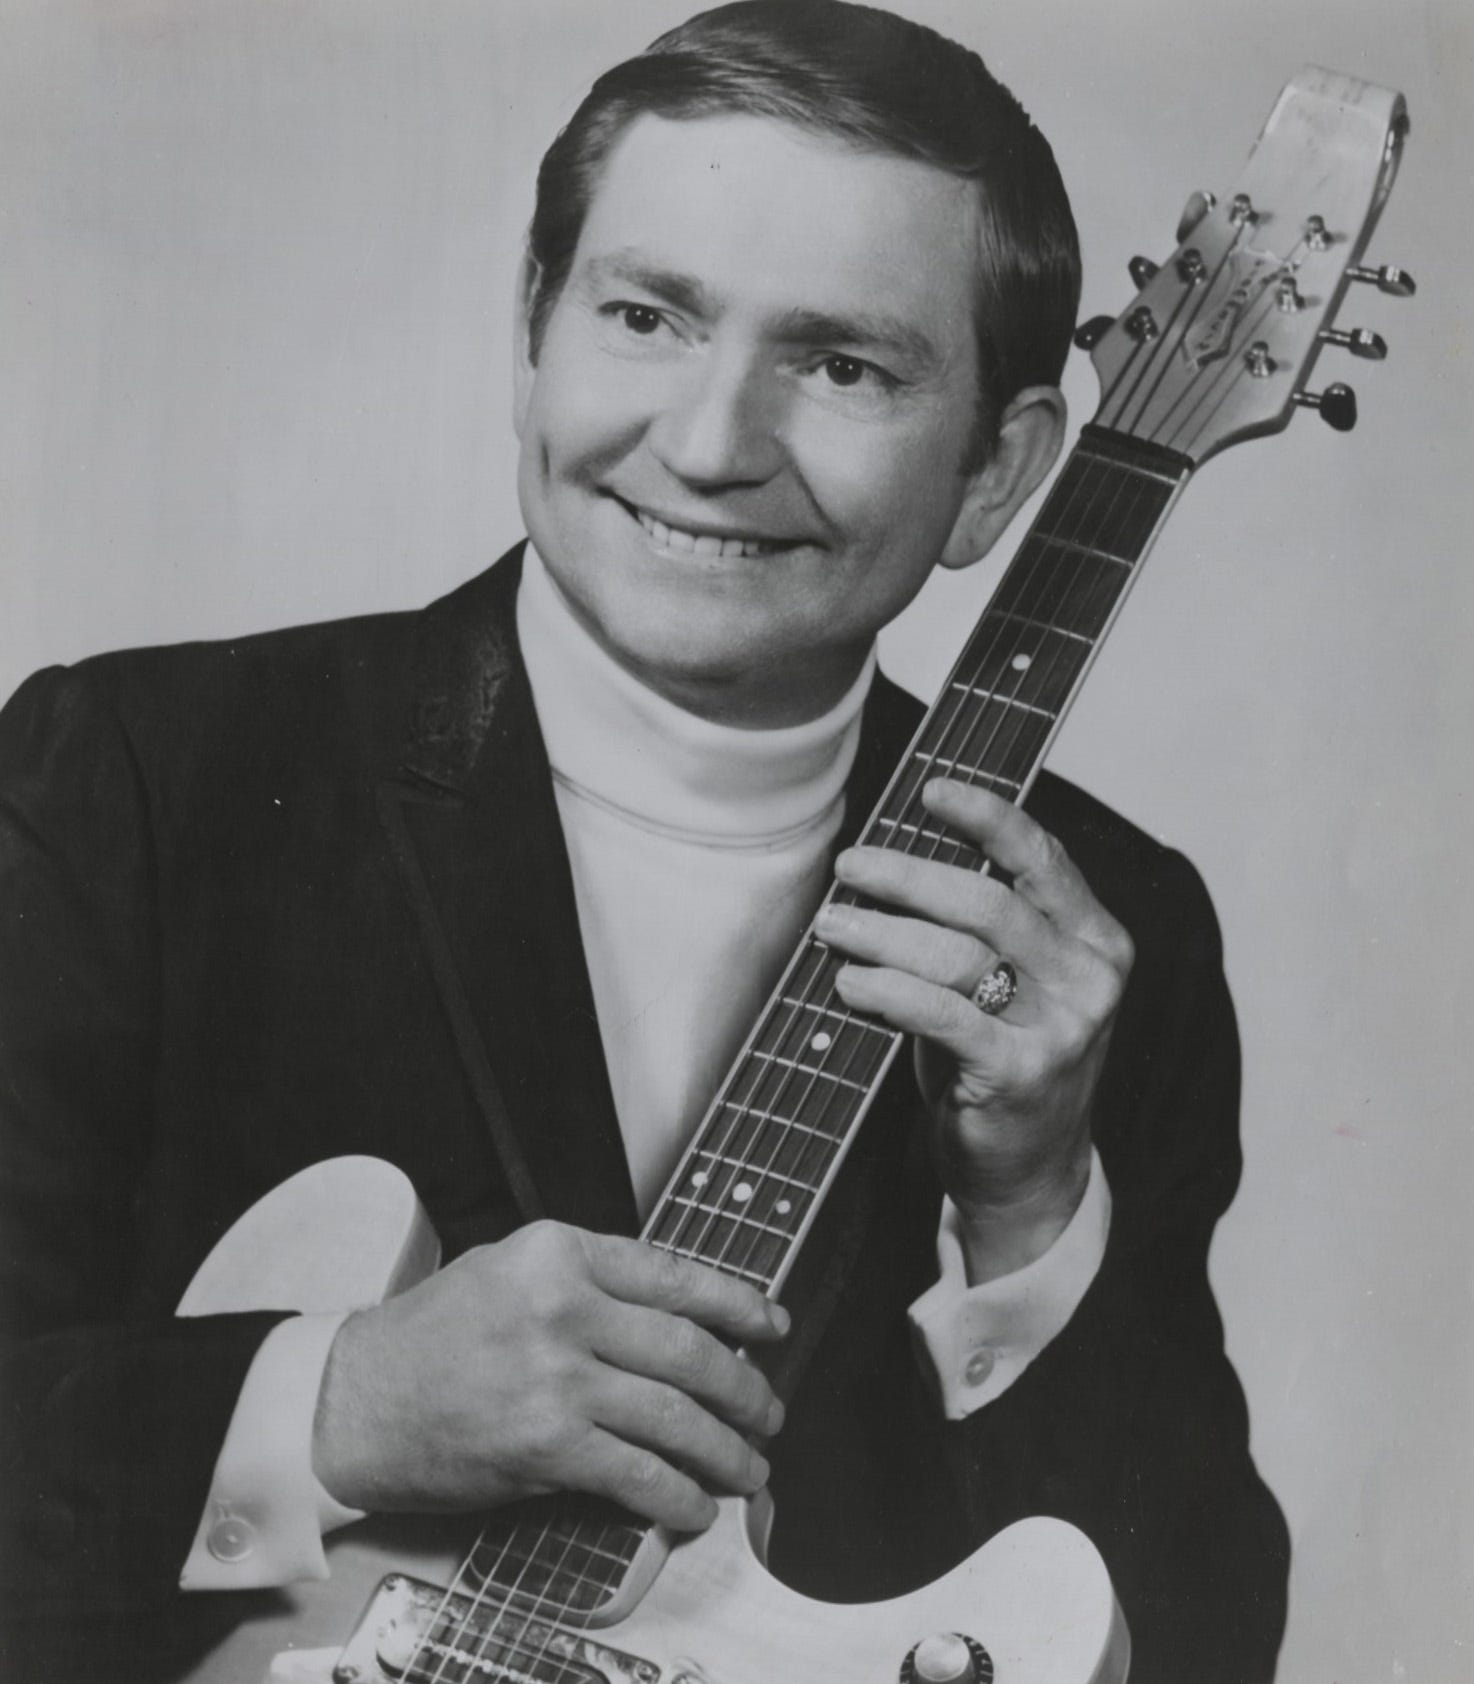 An undated promo photo of Willie Nelson.